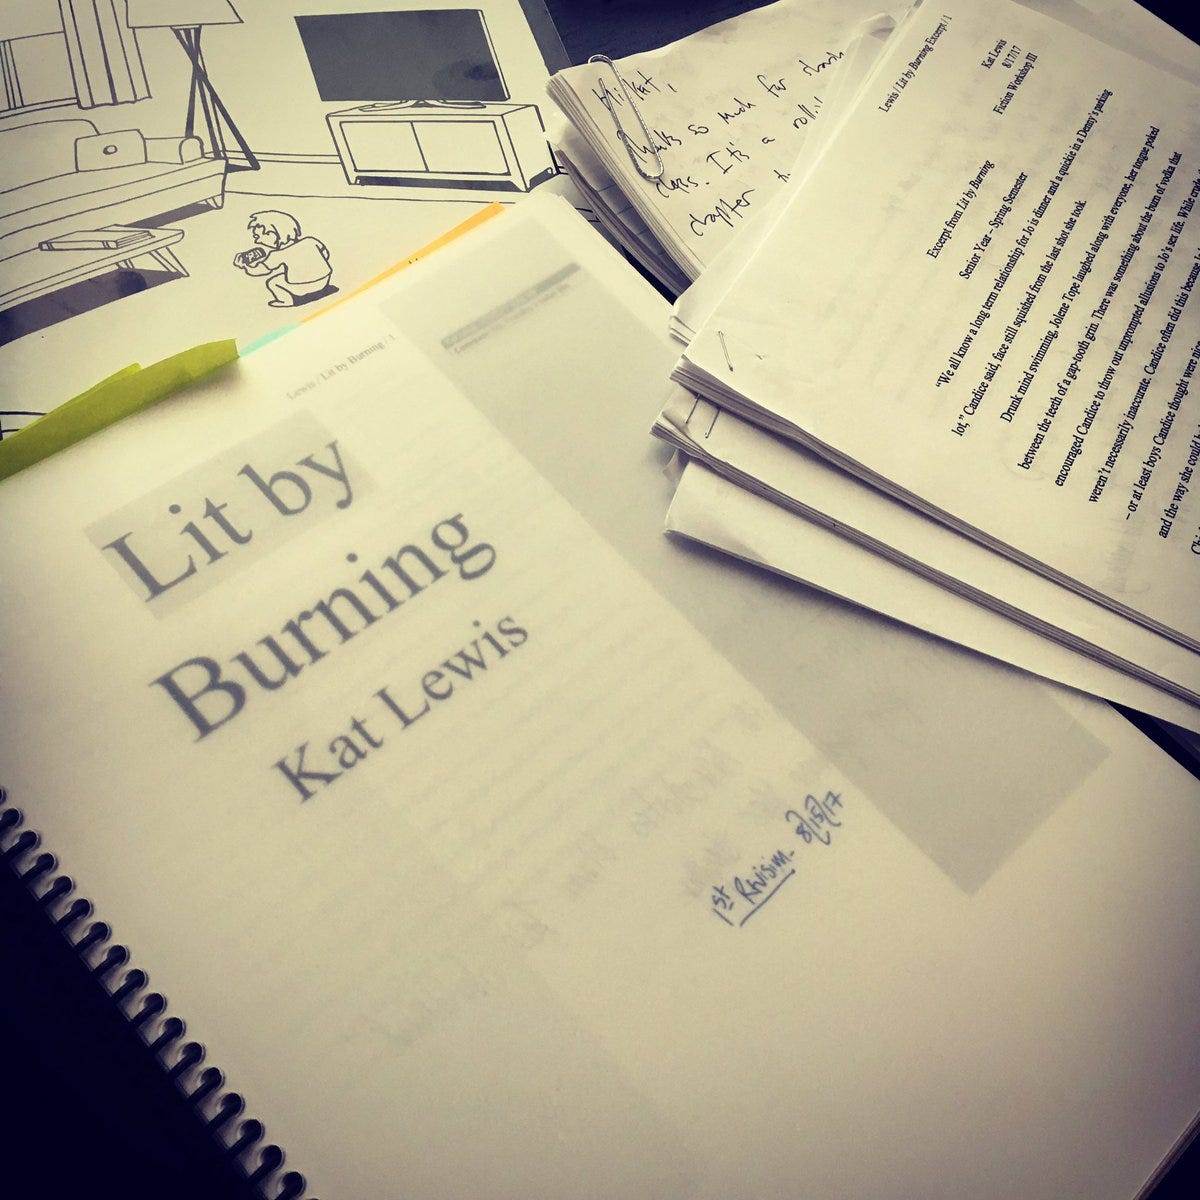 A photo of Kat’s messy writing desk. There is a bound print out of her novel, Lit by Burning, which is dated August 15, 2017.